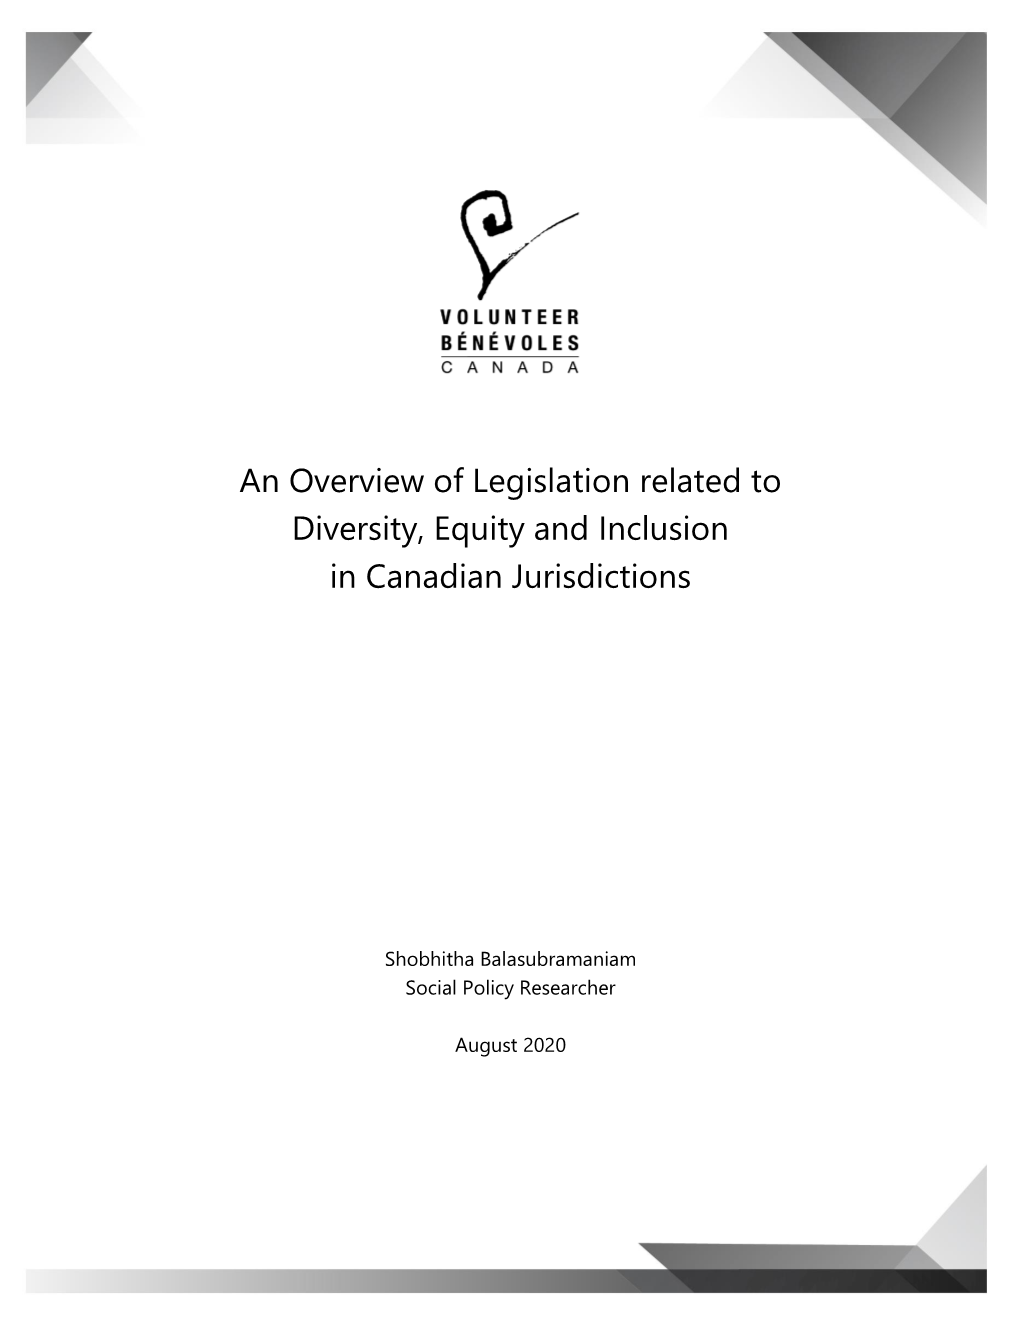 An Overview of Legislation Related to Diversity, Equity and Inclusion in Canadian Jurisdictions